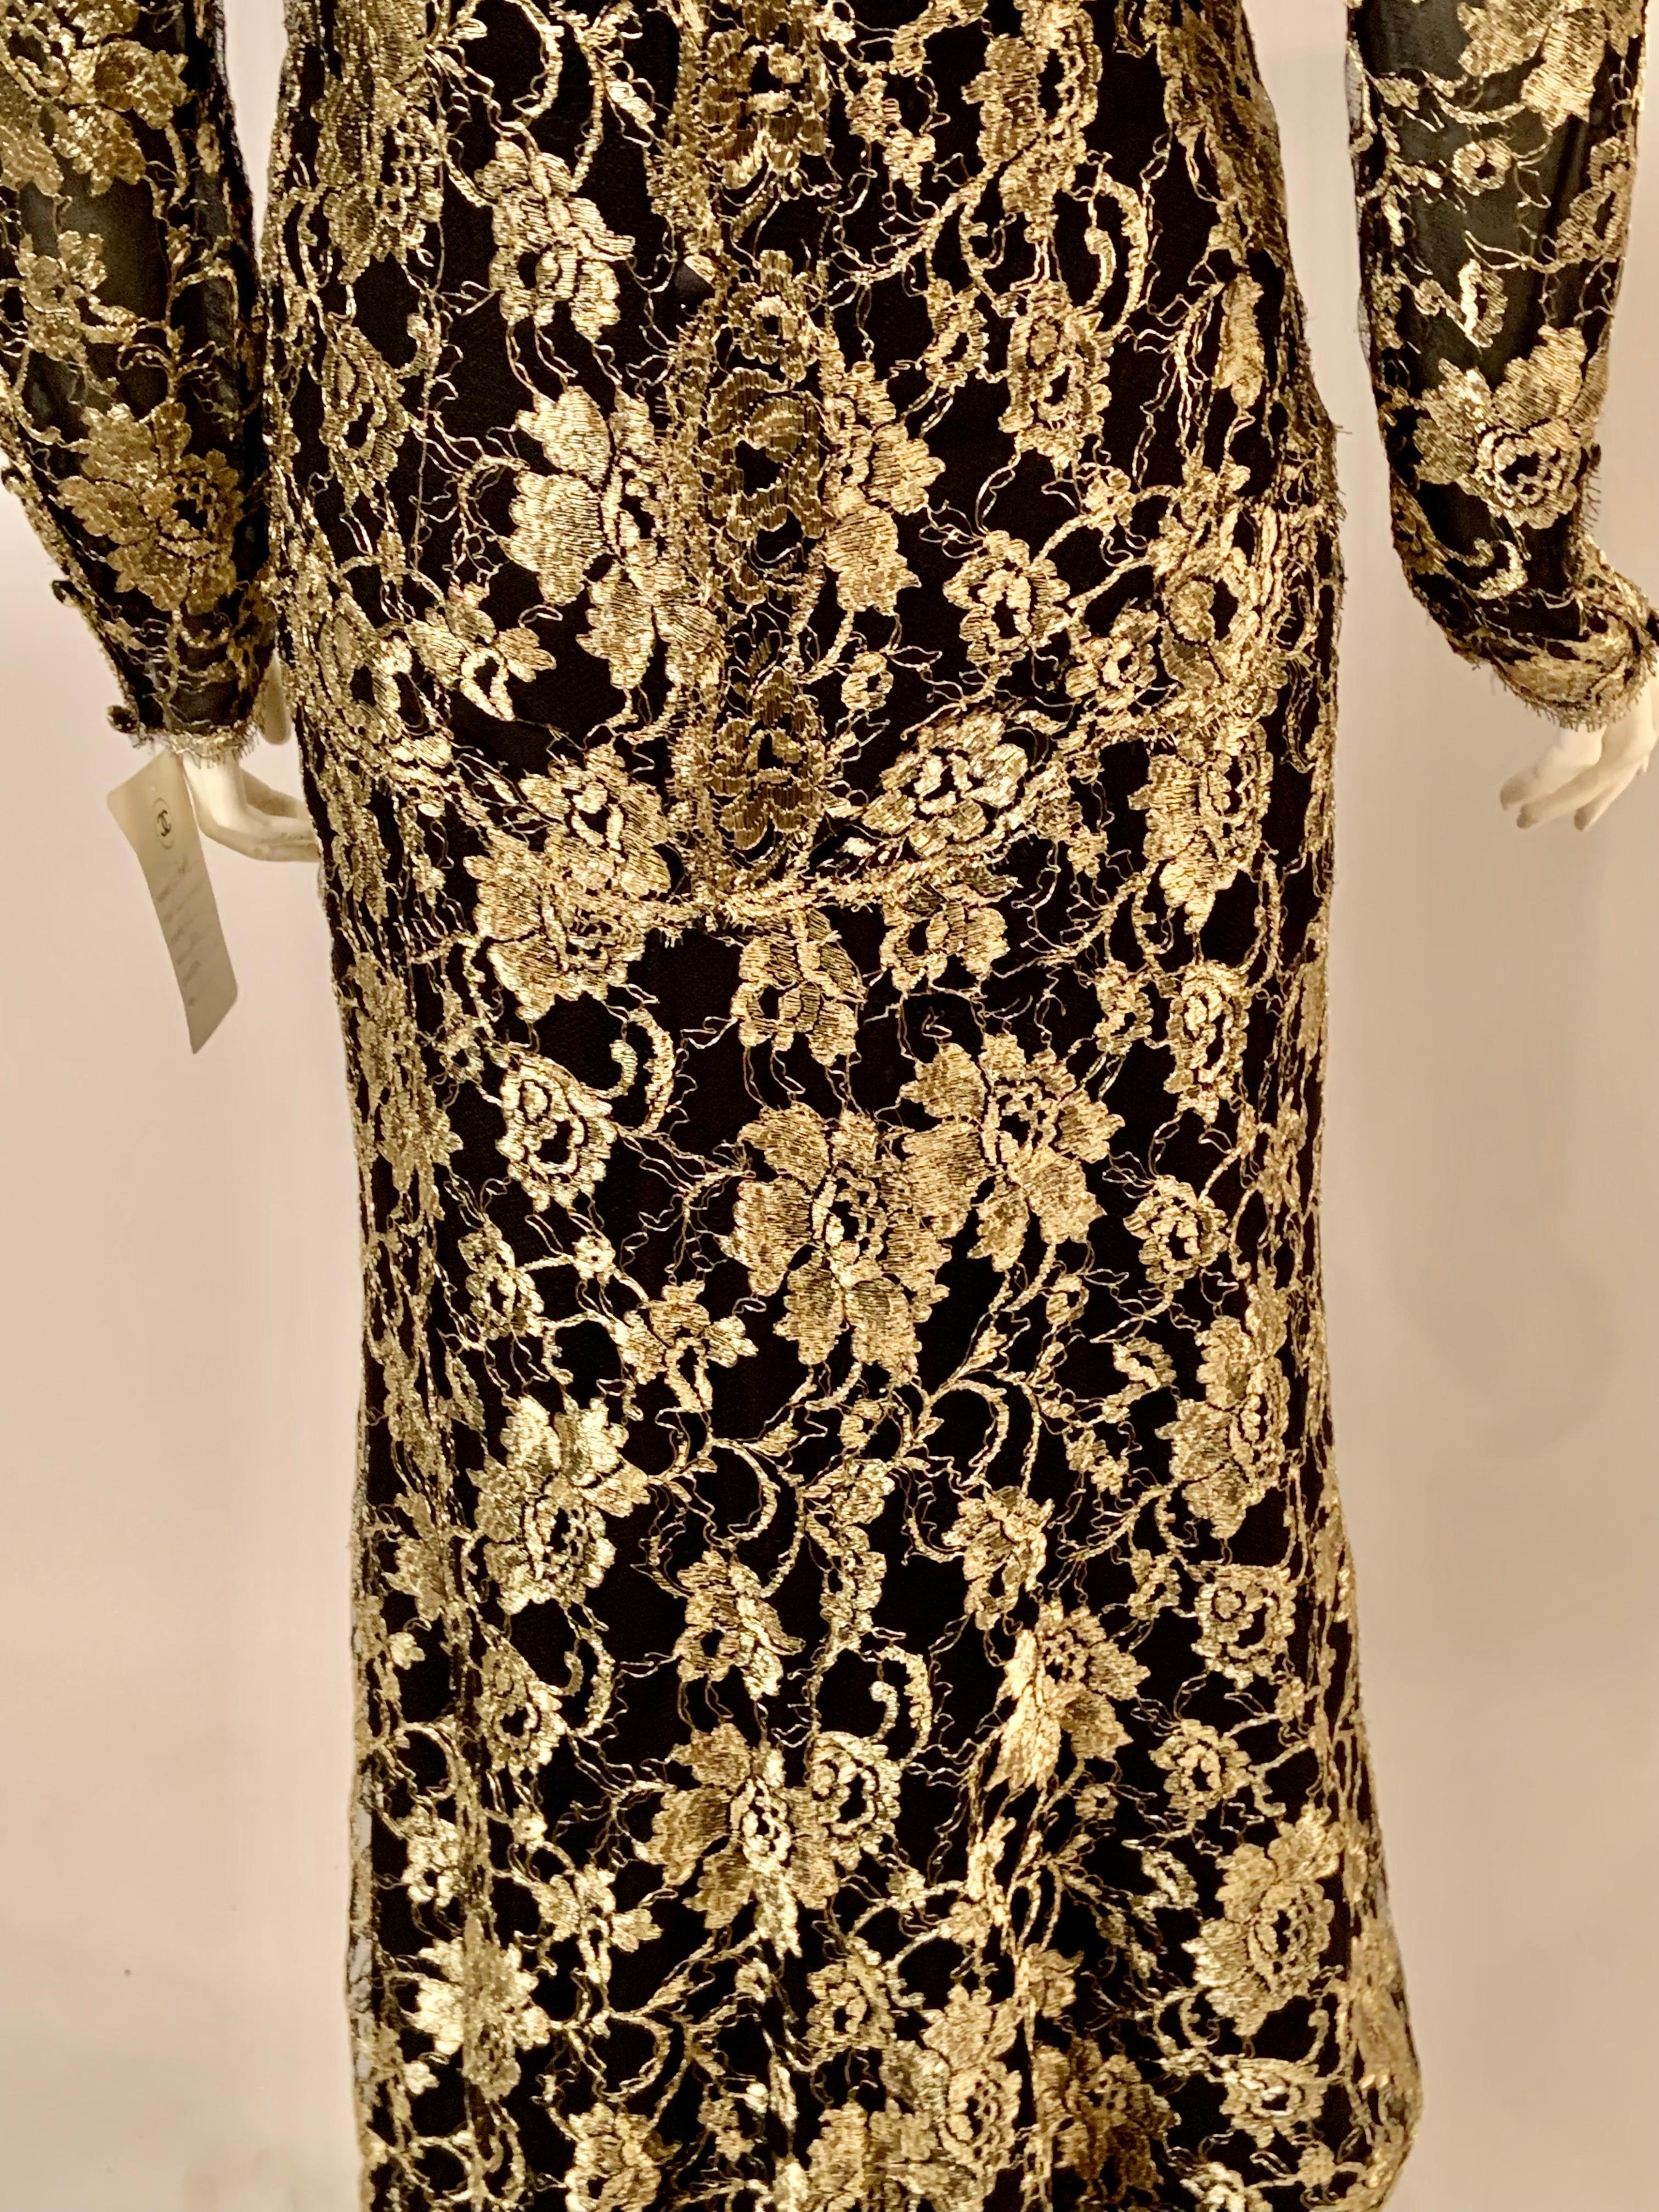 1986 Chanel by Karl Lagerfeld Gold and Black Lace Gown with Train Original Tag For Sale 9